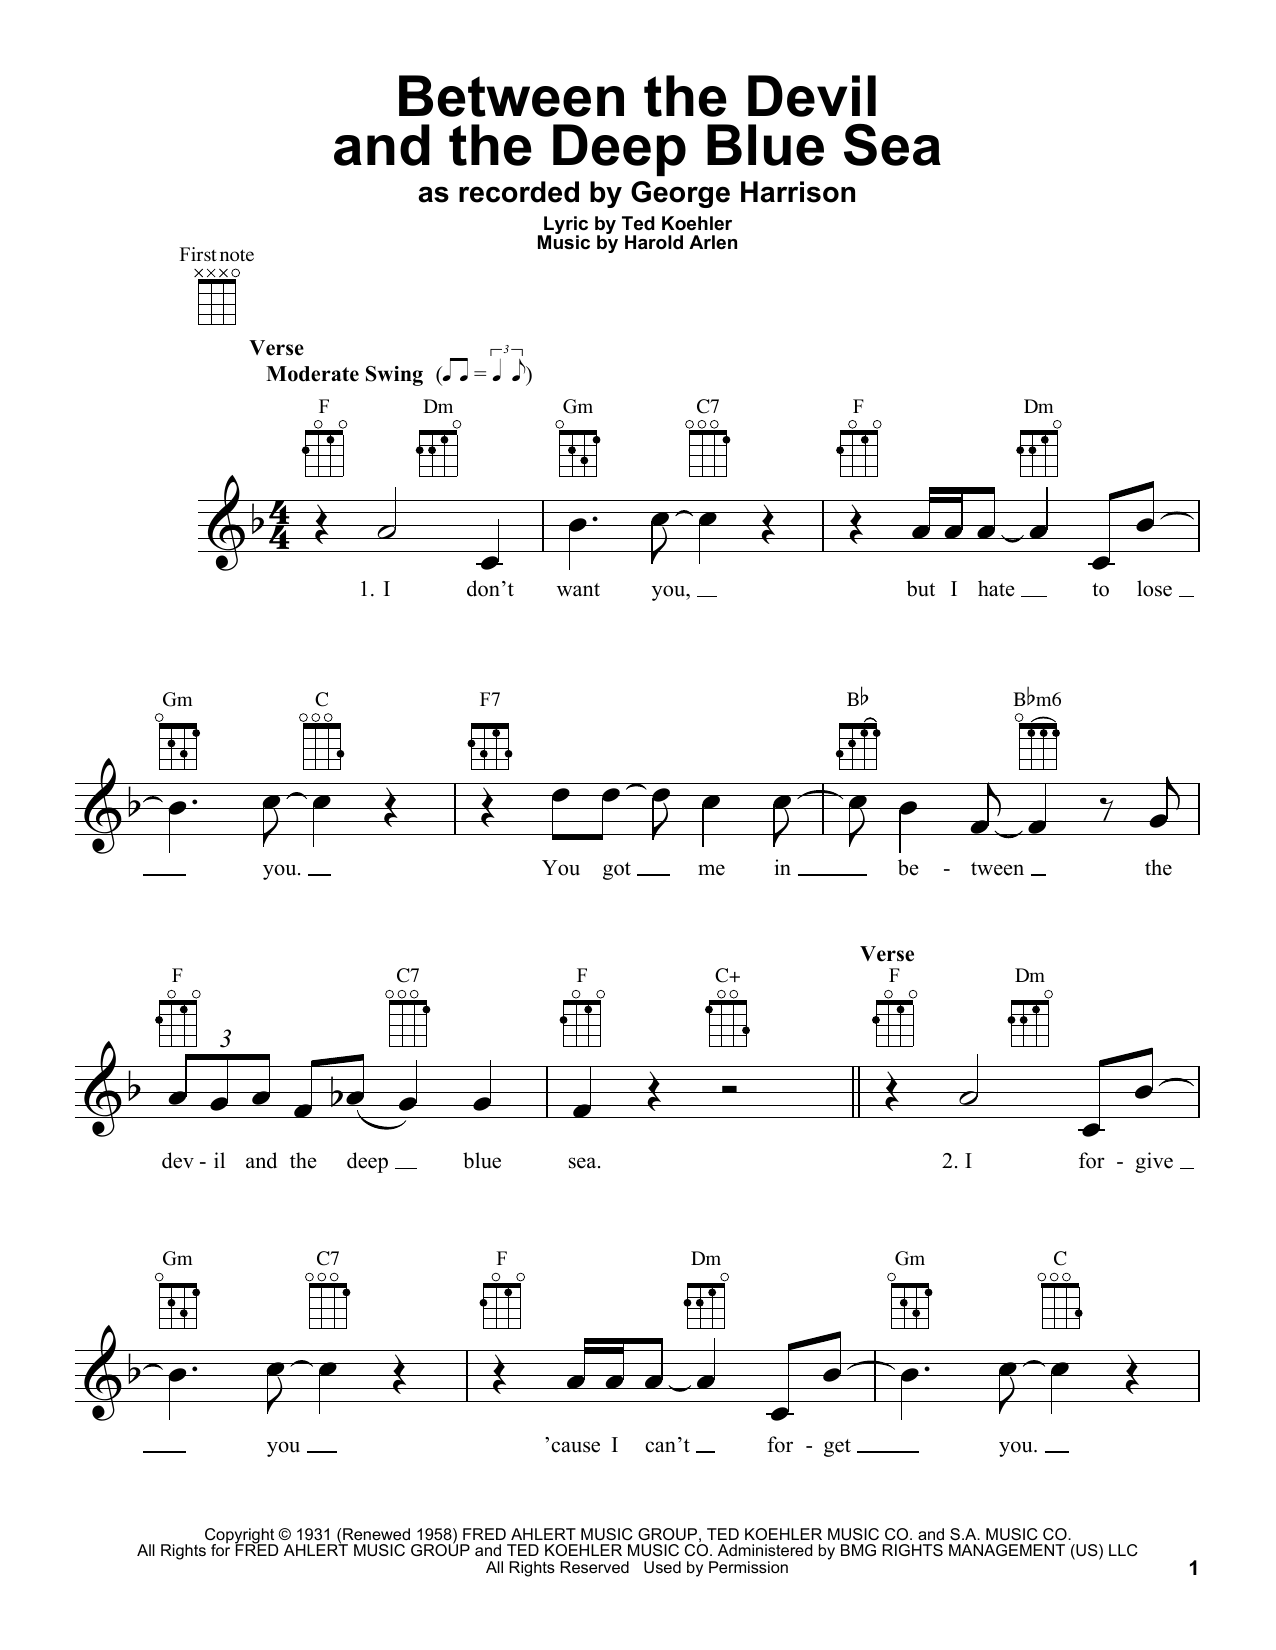 George Harrison Between The Devil And The Deep Blue Sea sheet music notes and chords. Download Printable PDF.